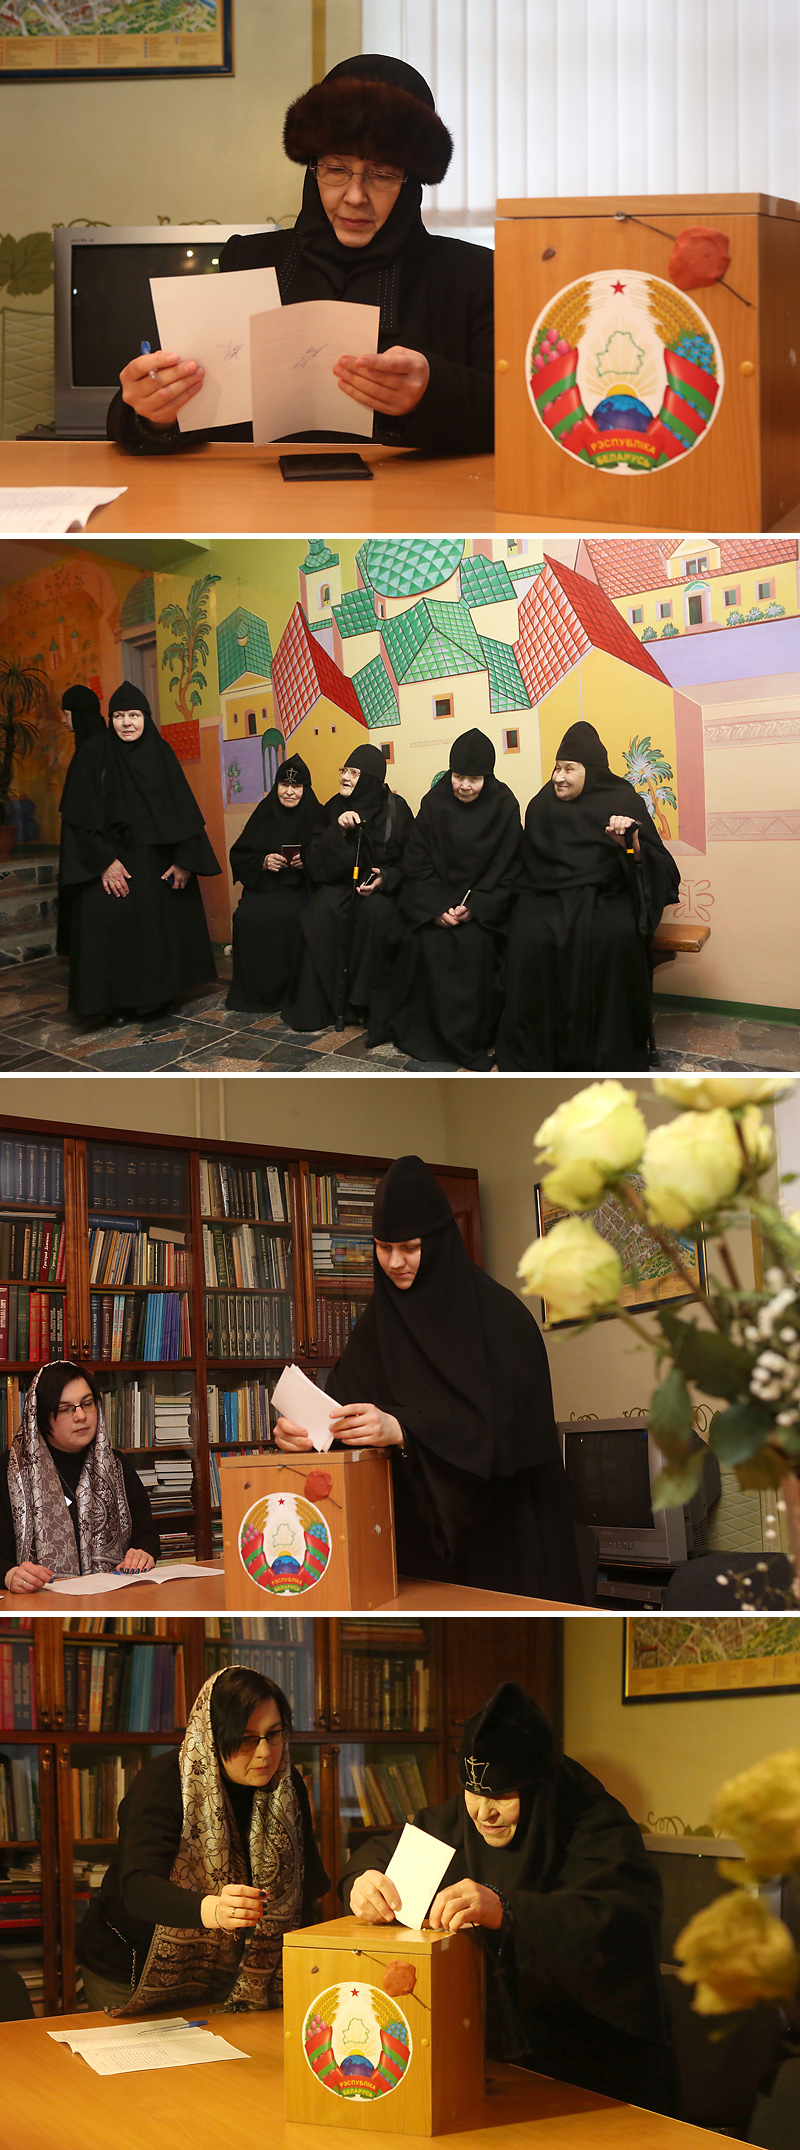 Nuns of the Grodno Holy Nativity-Theotokion convent vote in the elections, 2018